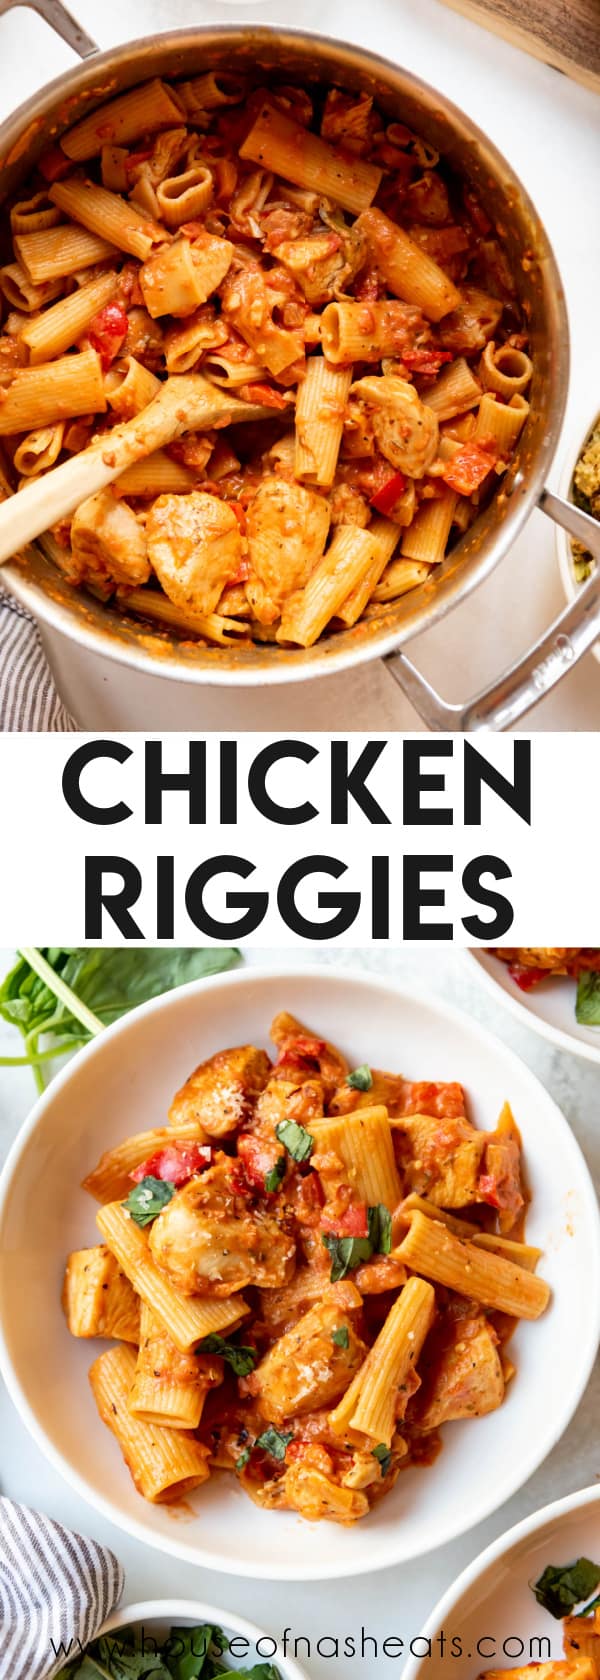 A collage of images of chicken riggies with text overlay.